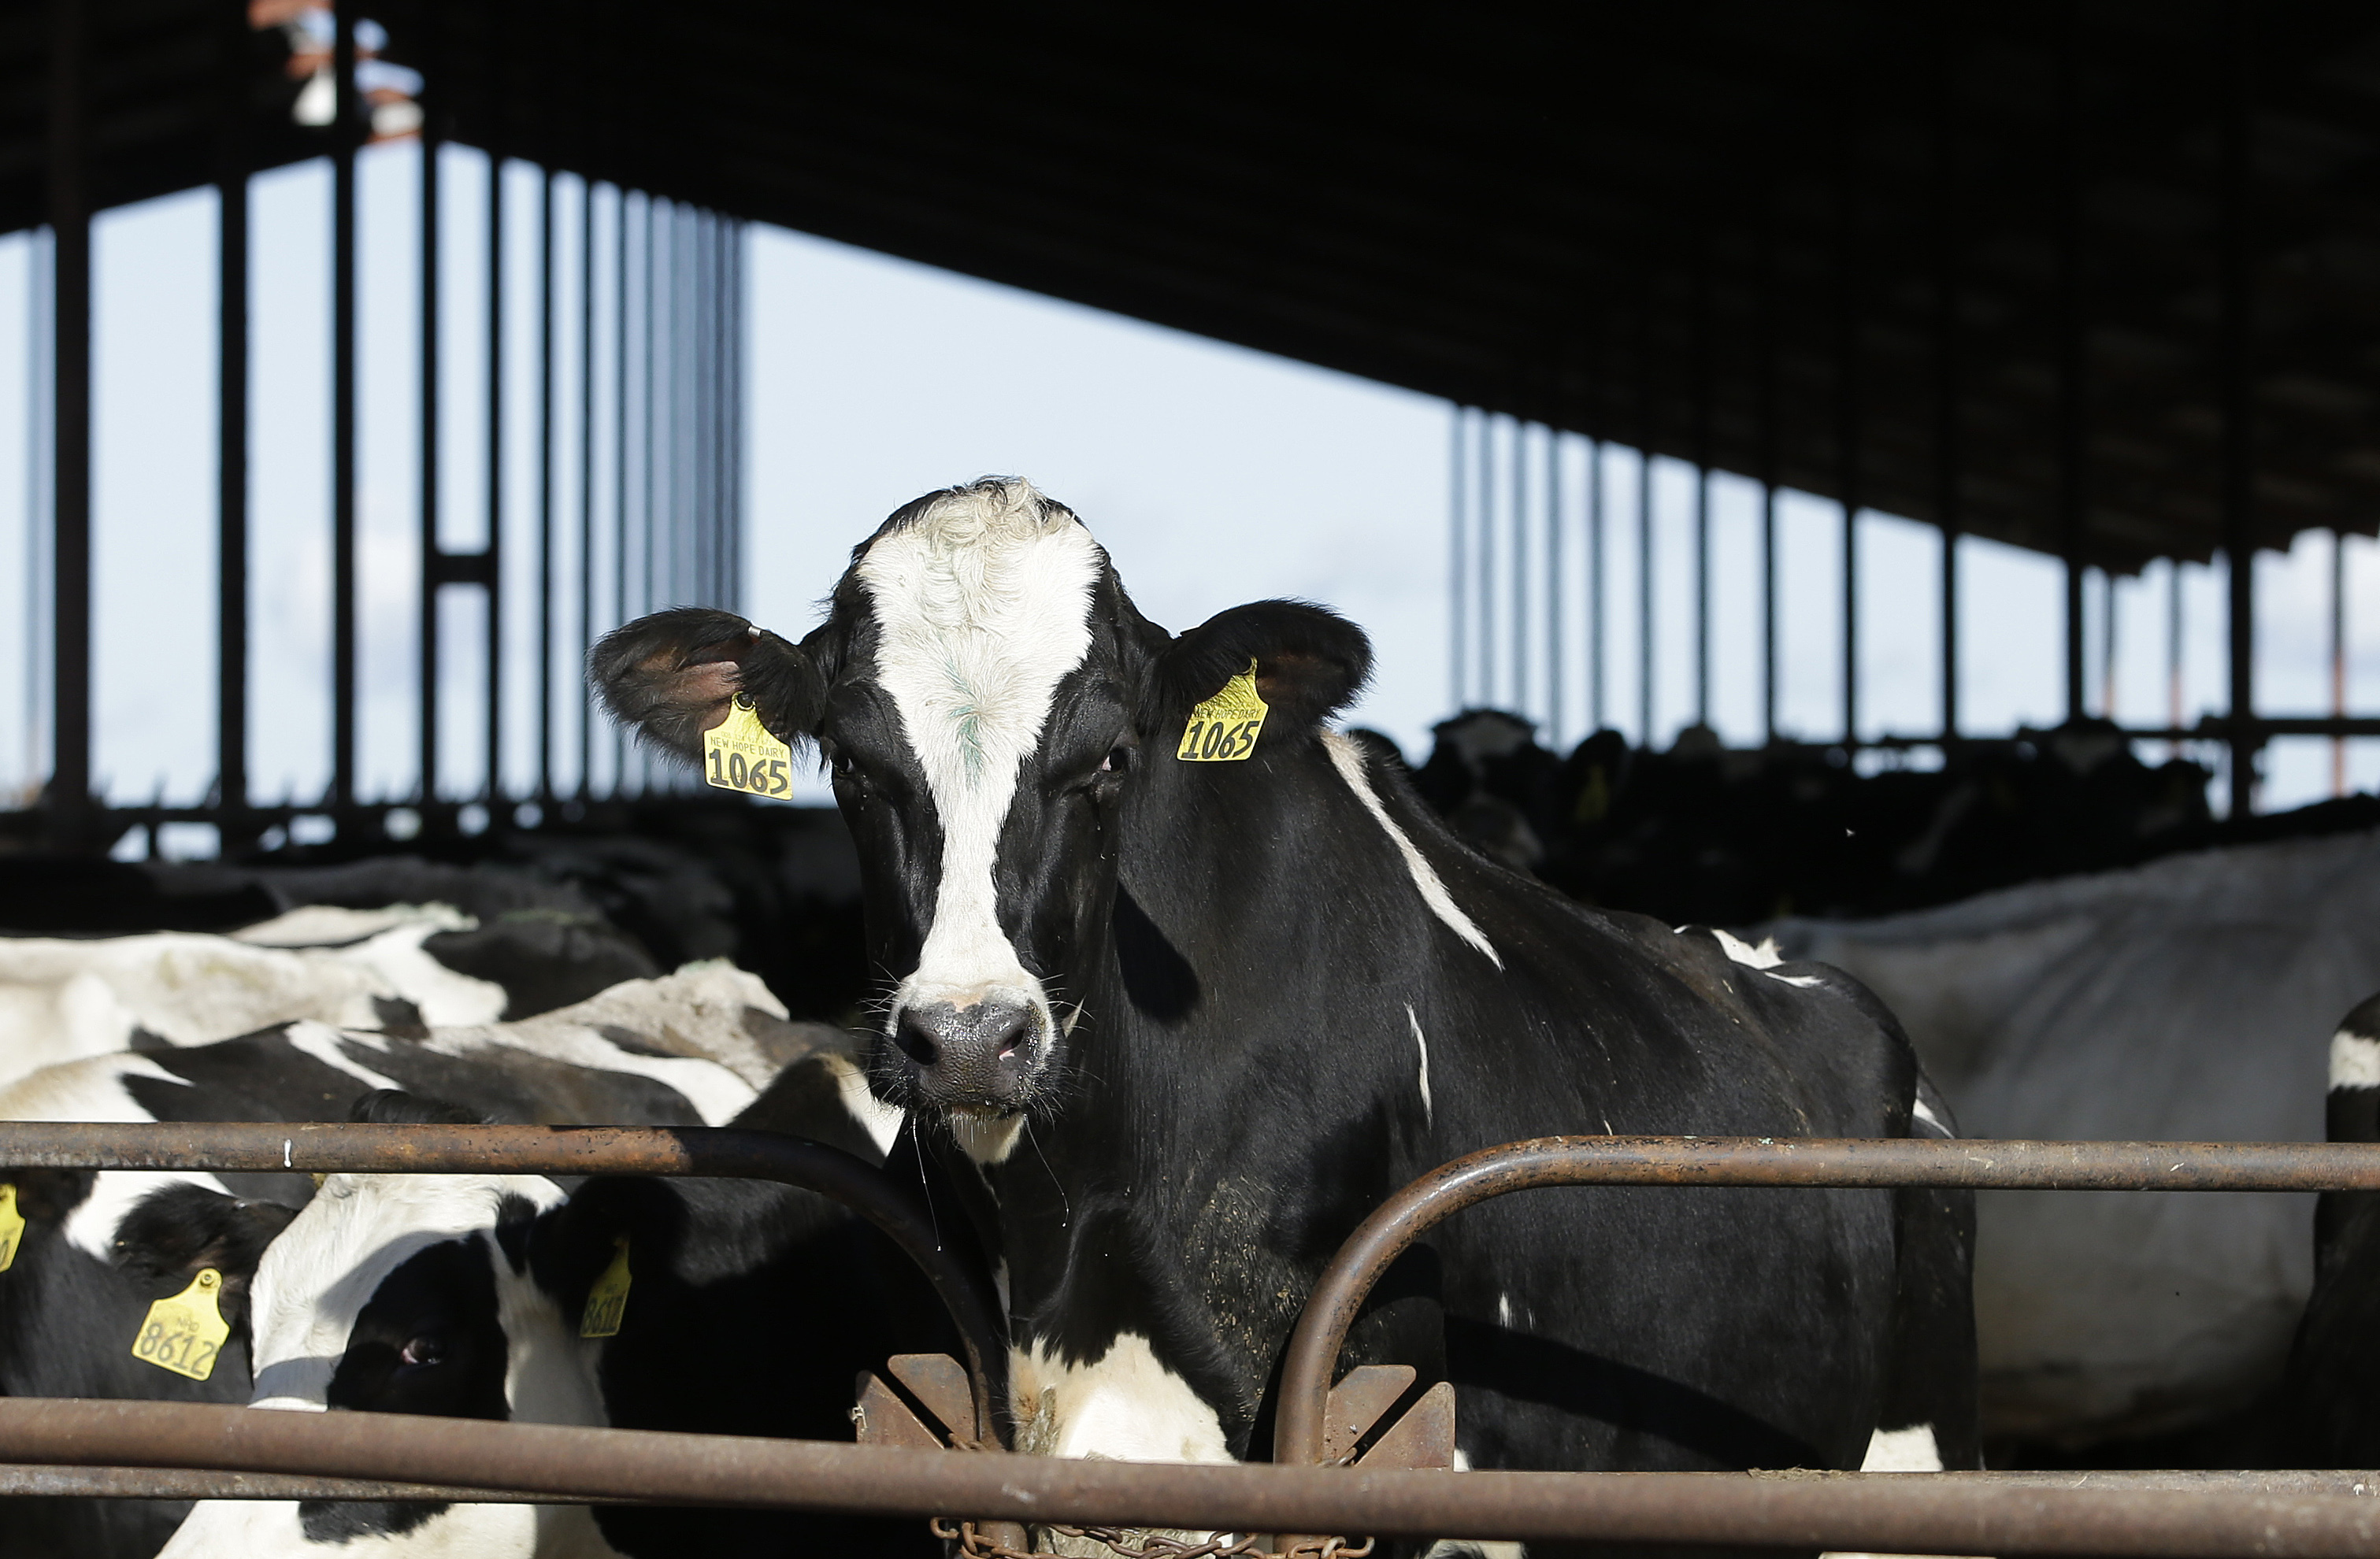 Bird flu concerns over U.S. dairy cattle growing. Here’s what to
know